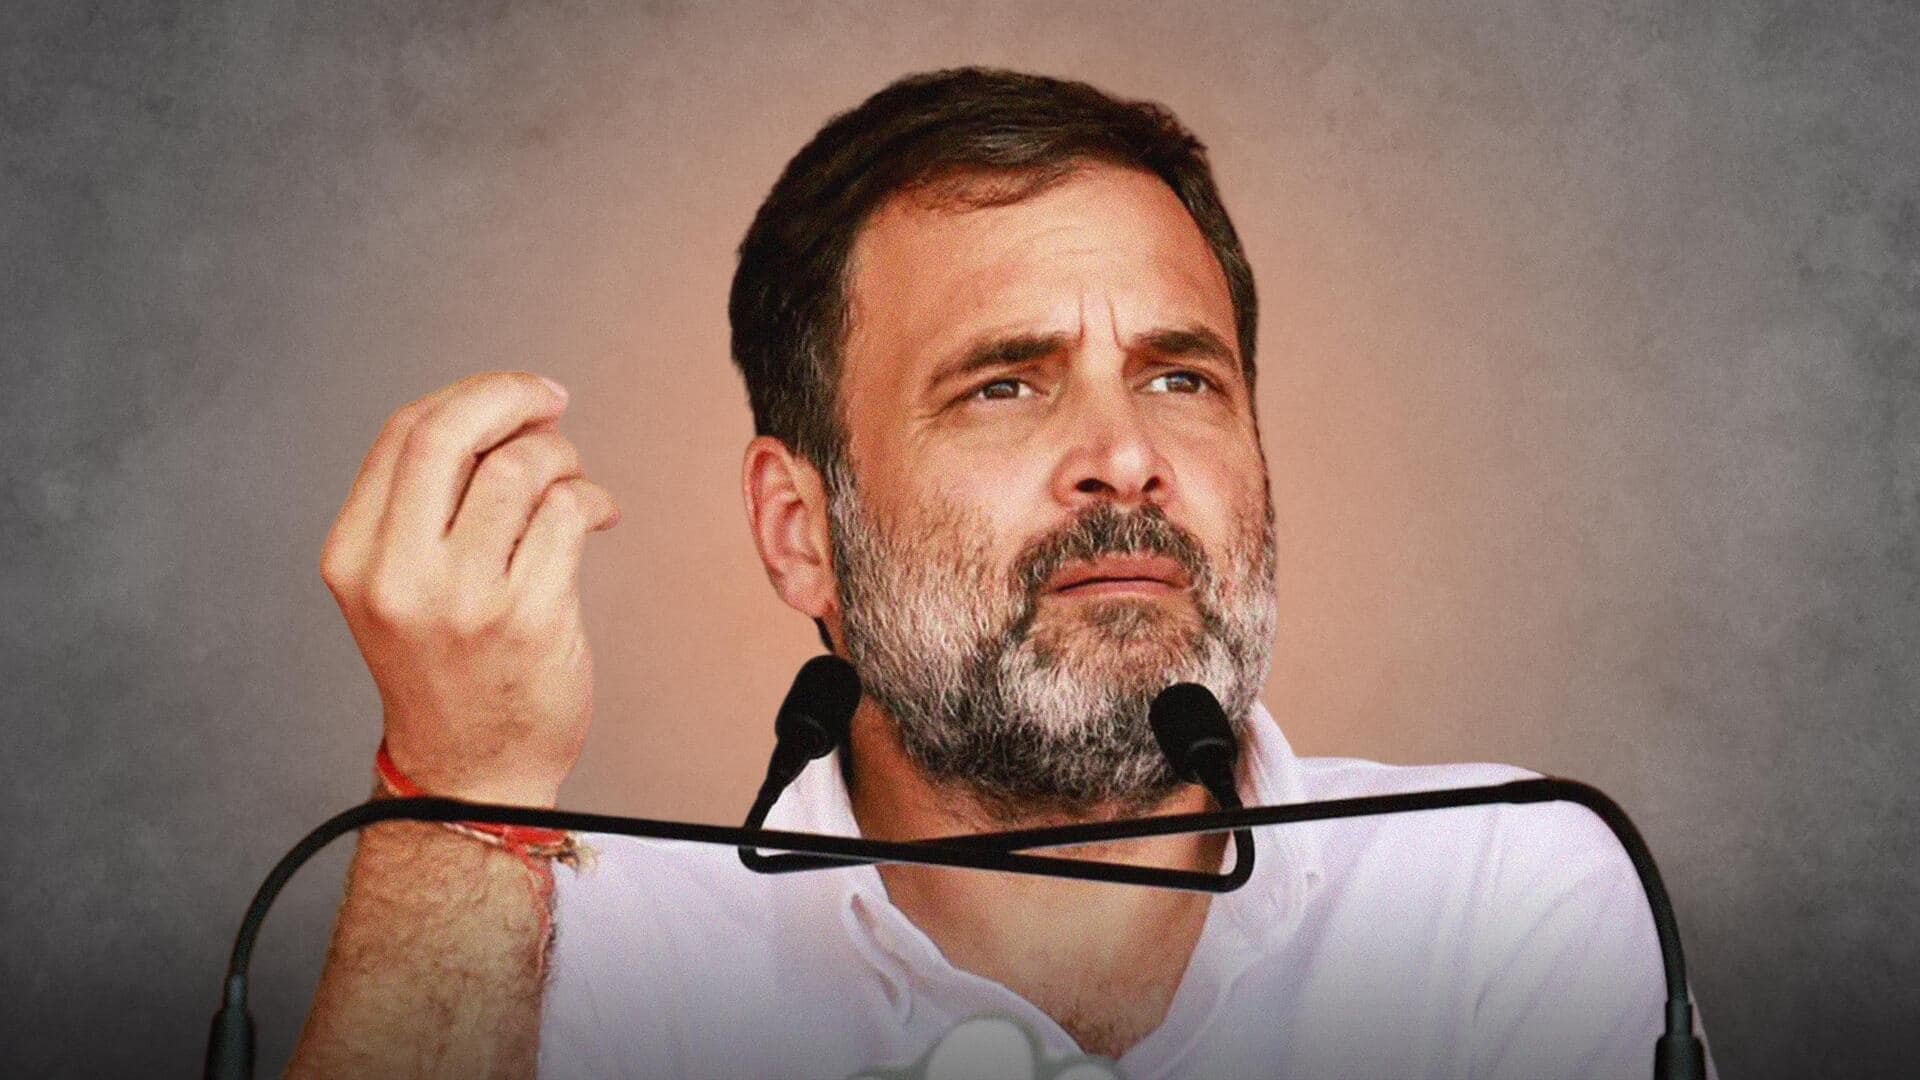 Rahul Gandhi claims Modi's interview on electoral bonds was 'scripted'